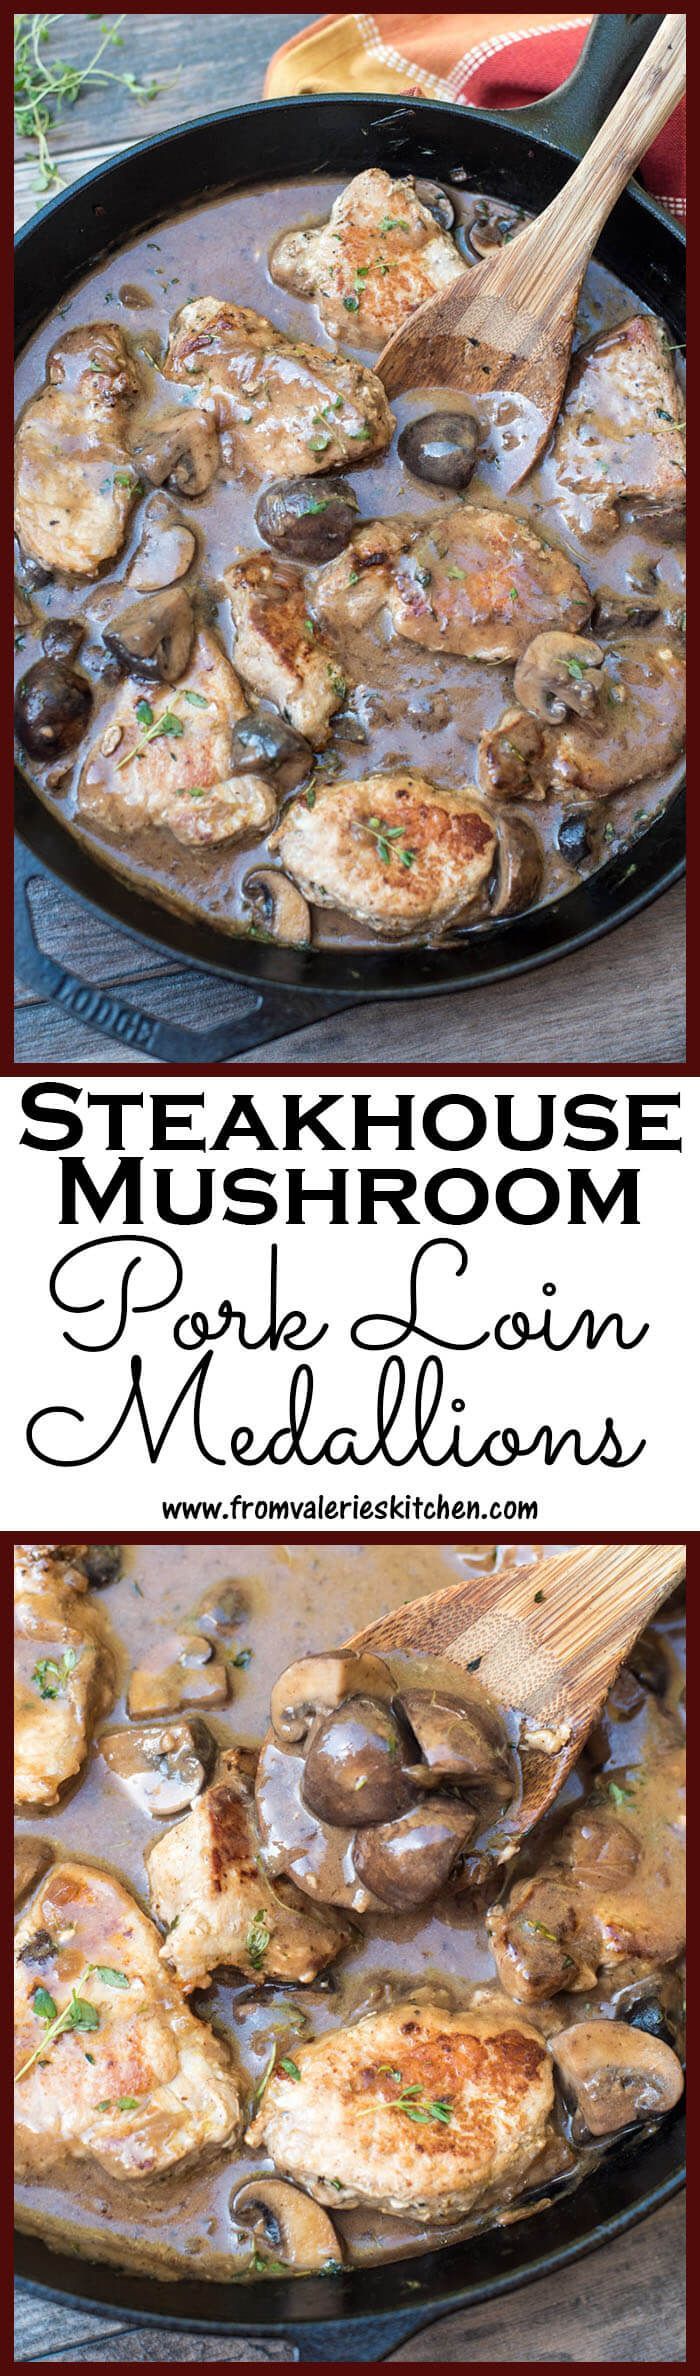 What’s for dinner at your house tonight?   Steakhouse Mushroom Pork Loin Medallions sound like a great idea. #ad